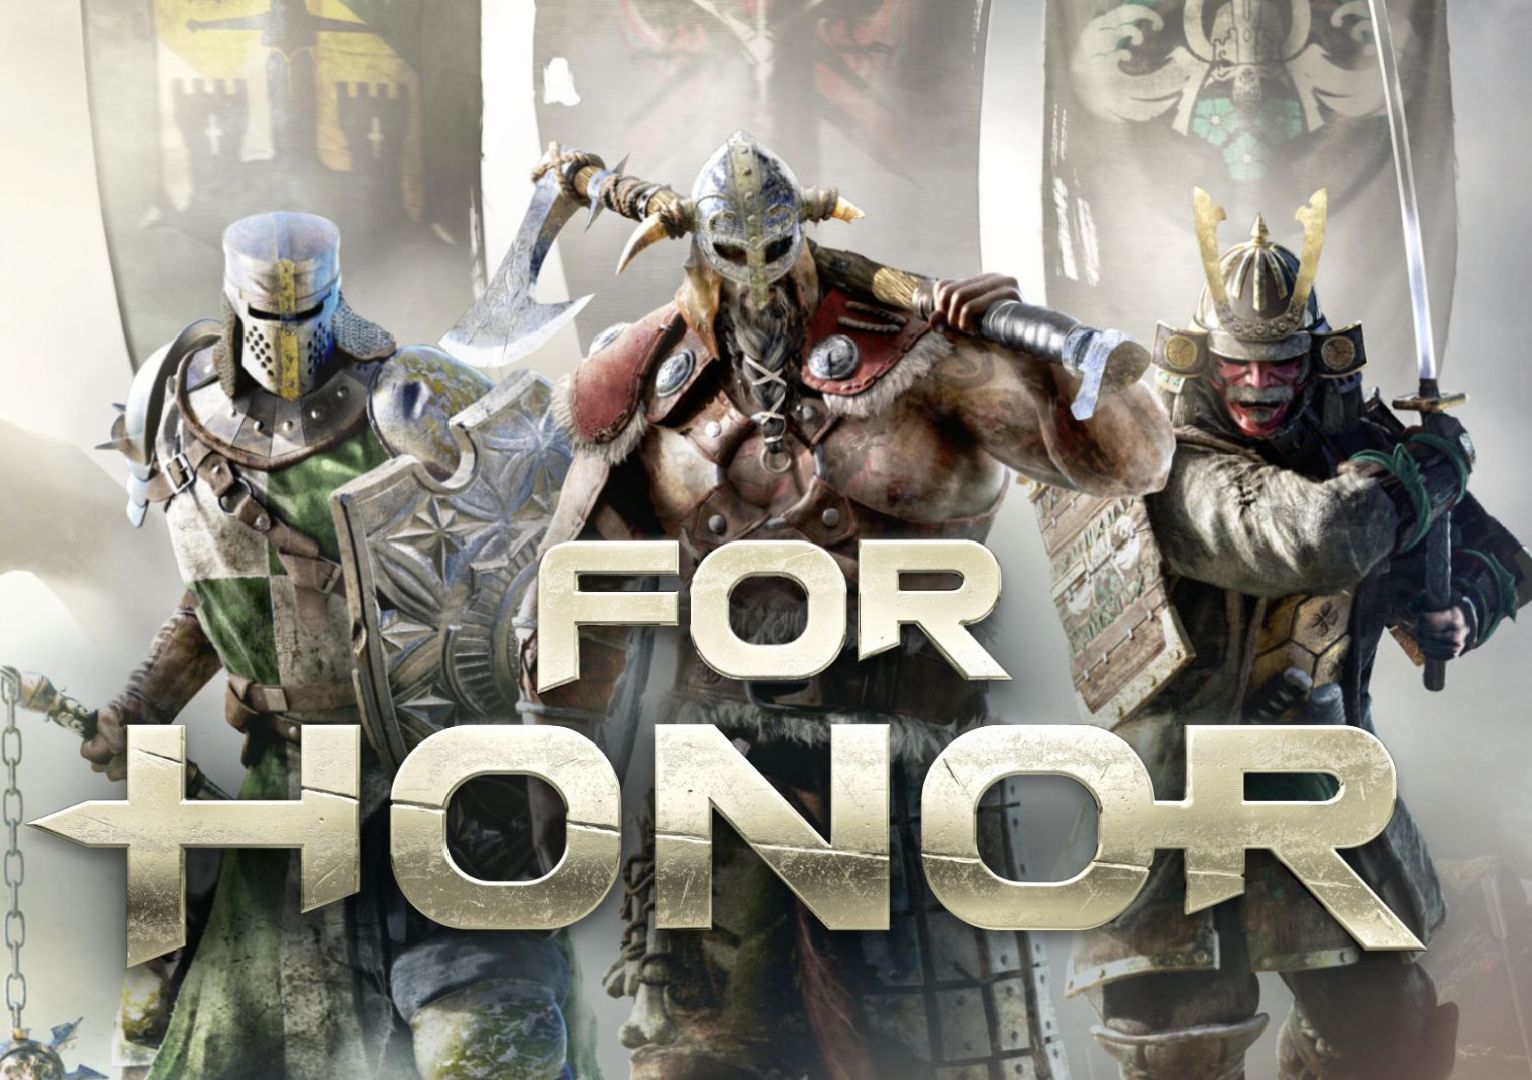 Guide For Honor - jeuxvideo.com